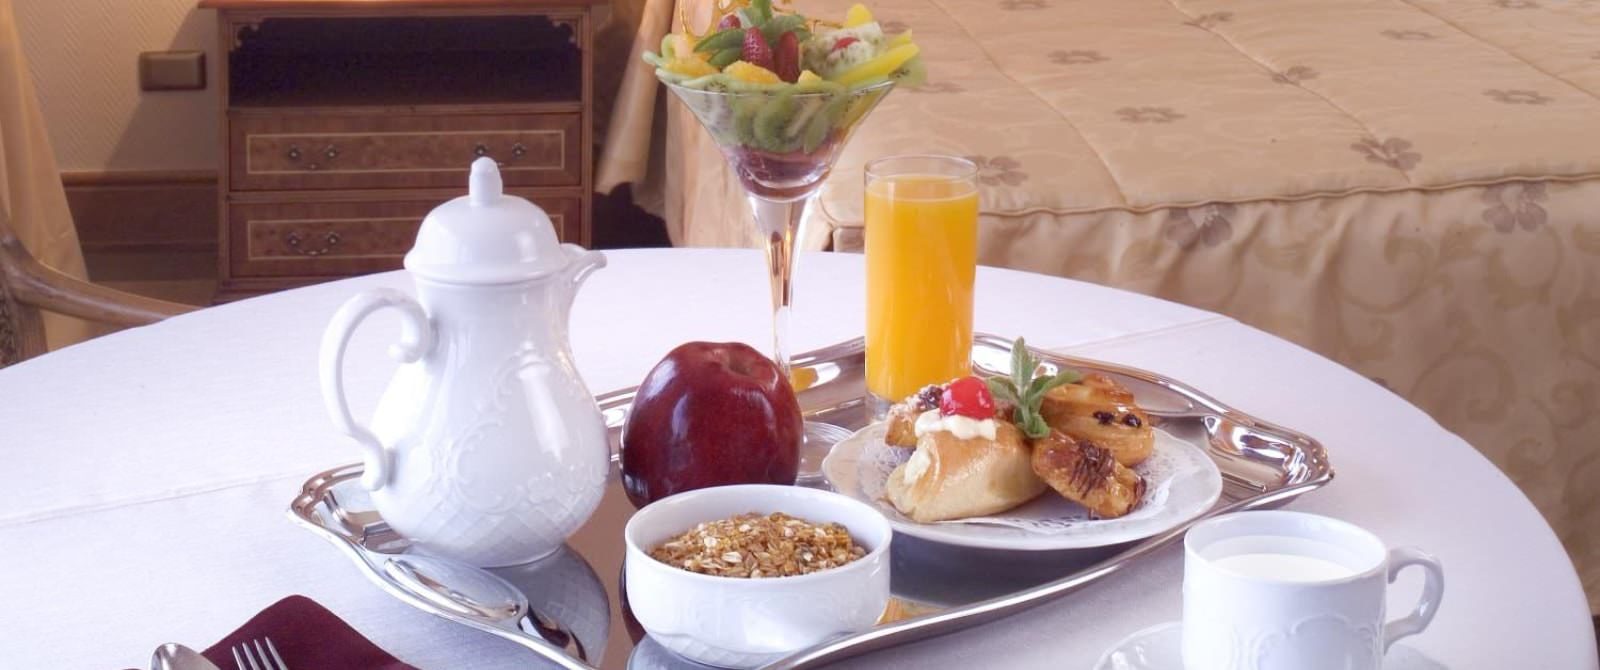 Silver tray with breakfast items on table with white tablecloth